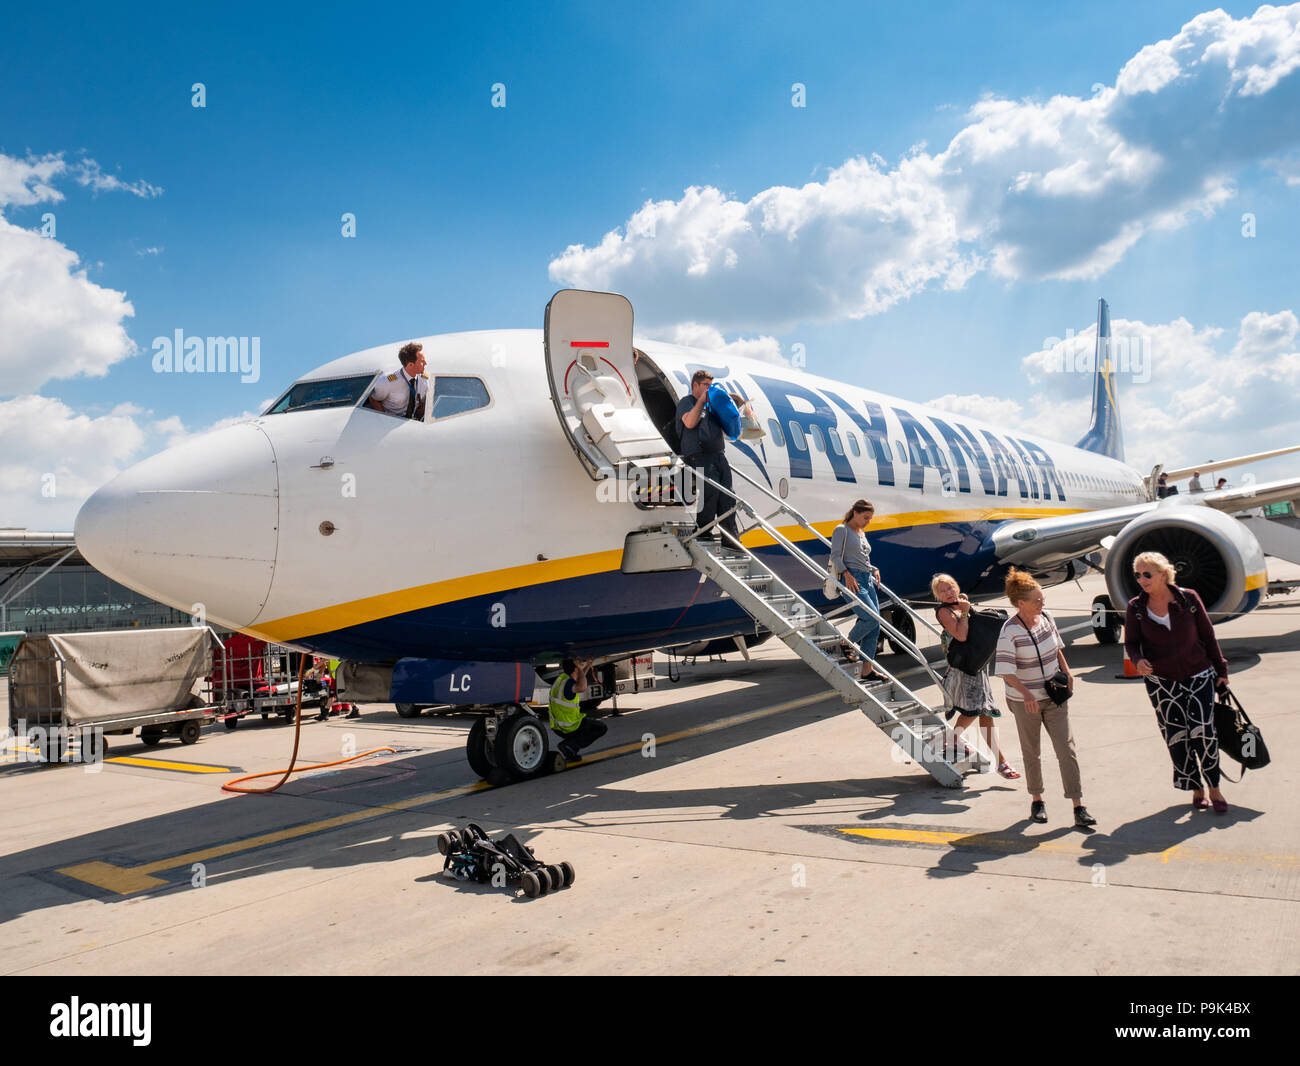 Passengers disembarking from a Ryanair plane at Stansted airport, UK Stock Photo